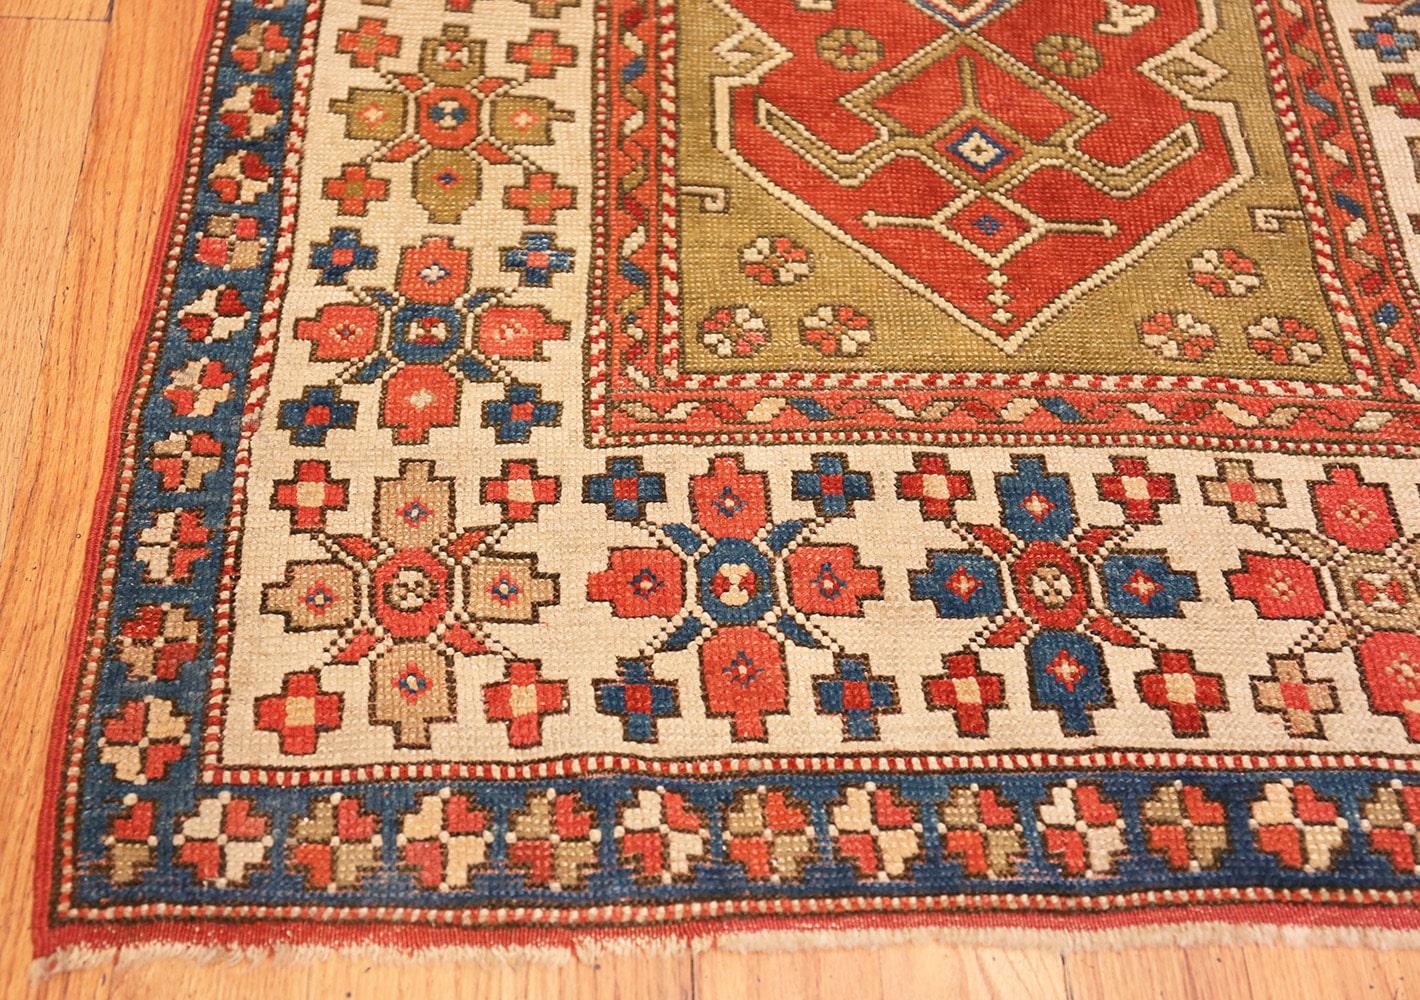 Hand-Knotted Tribal Antique Turkish Bergama Rug. Size: 3 ft x 4 ft 6 in (0.91 m x 1.37 m)